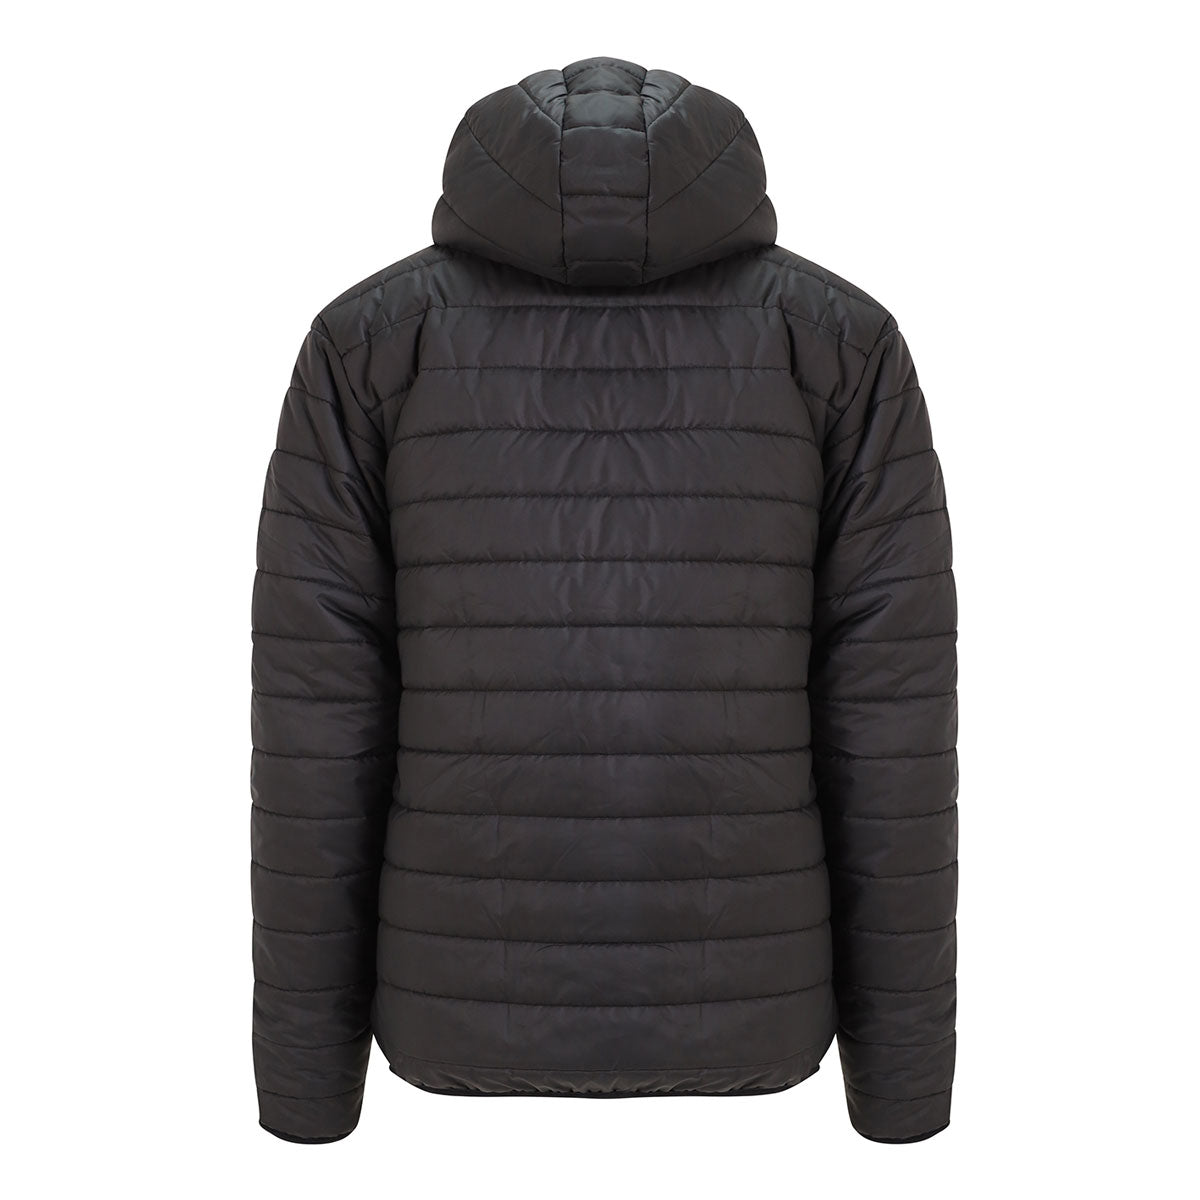 Mc Keever Ireland Supporters Core 22 Puffa Jacket - Youth - Black